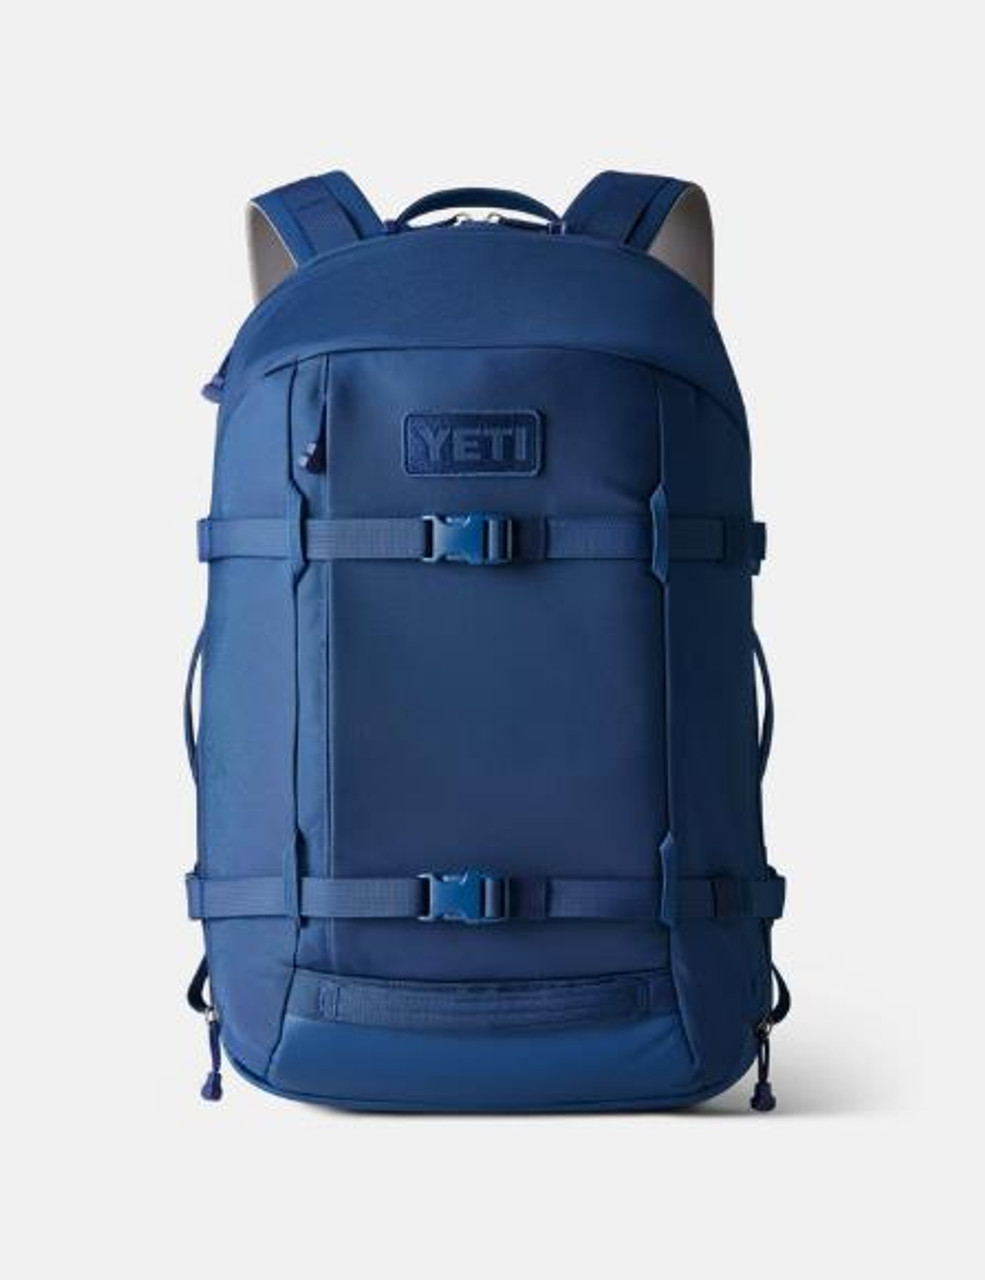 https://cdn11.bigcommerce.com/s-zm4ewfchee/images/stencil/1280x1280/products/4857/30677/Yeti-Crossroads-Backpack-27L-888830079362_image5__57718.1676633649.jpg?c=1